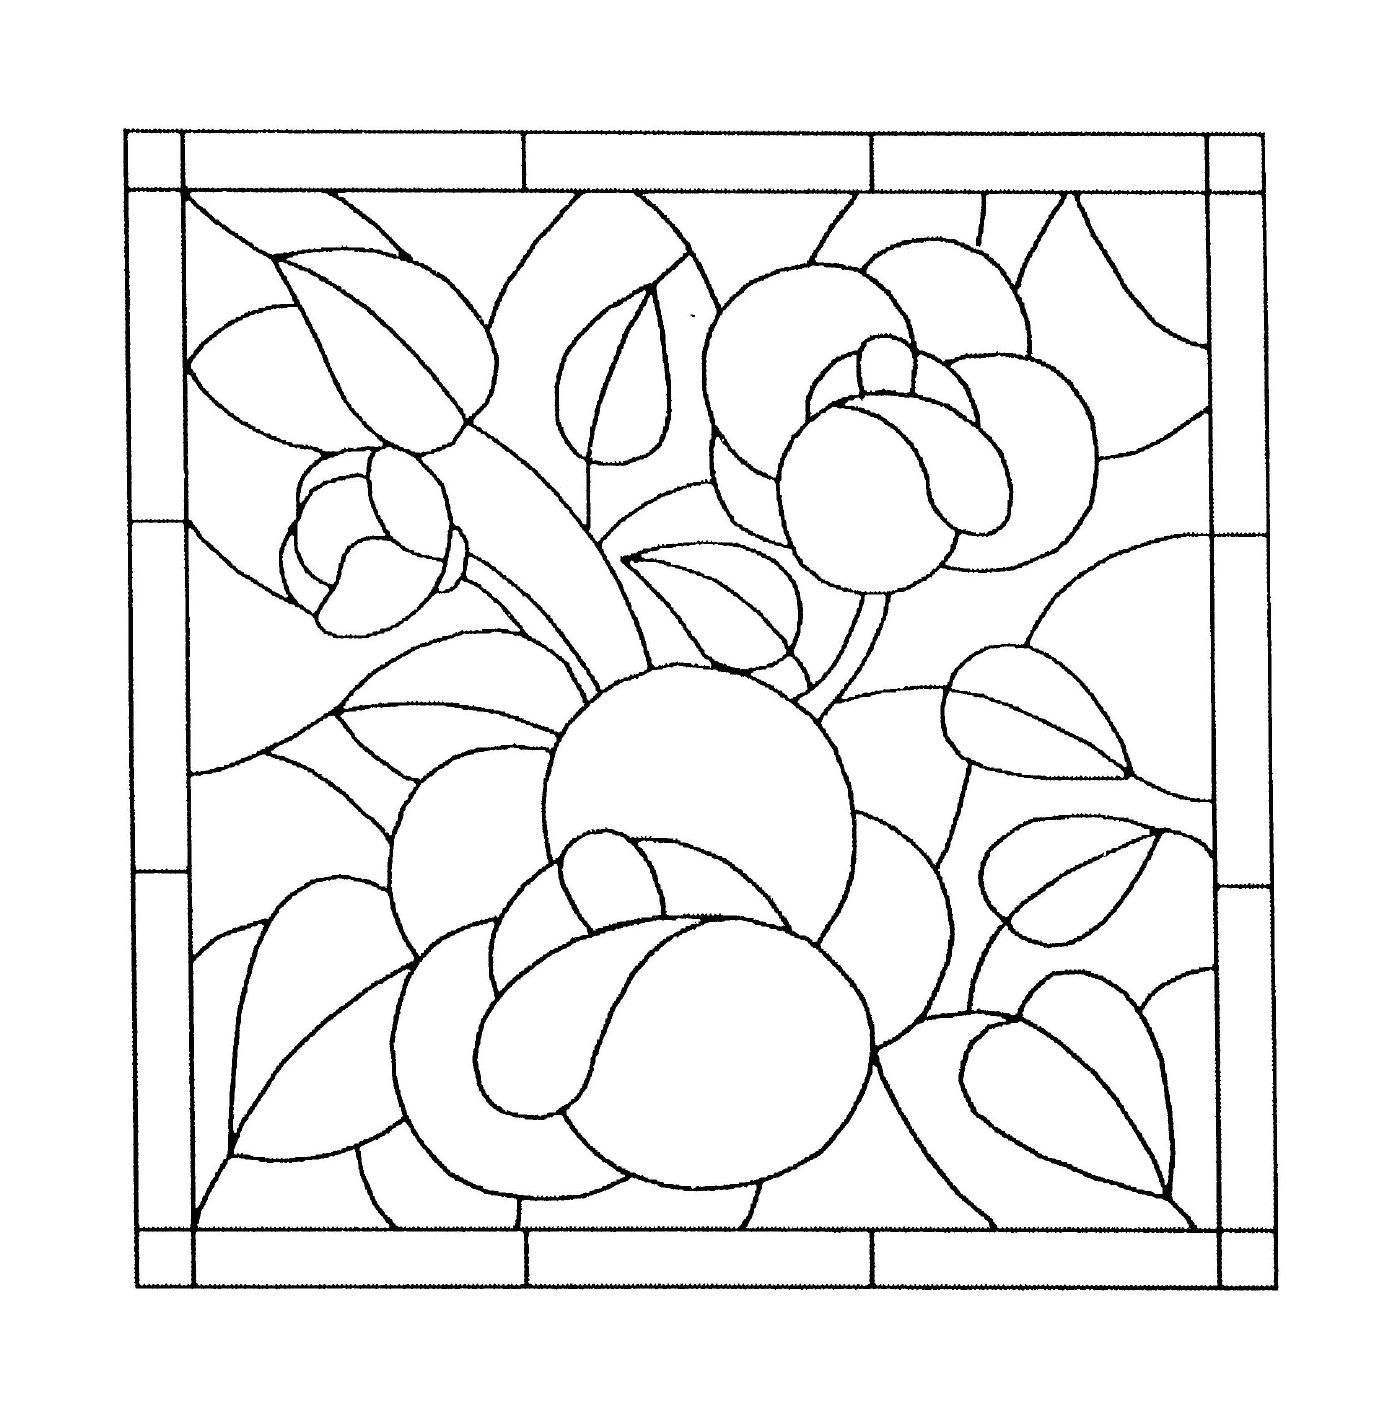  Window in stained glass with flowers 